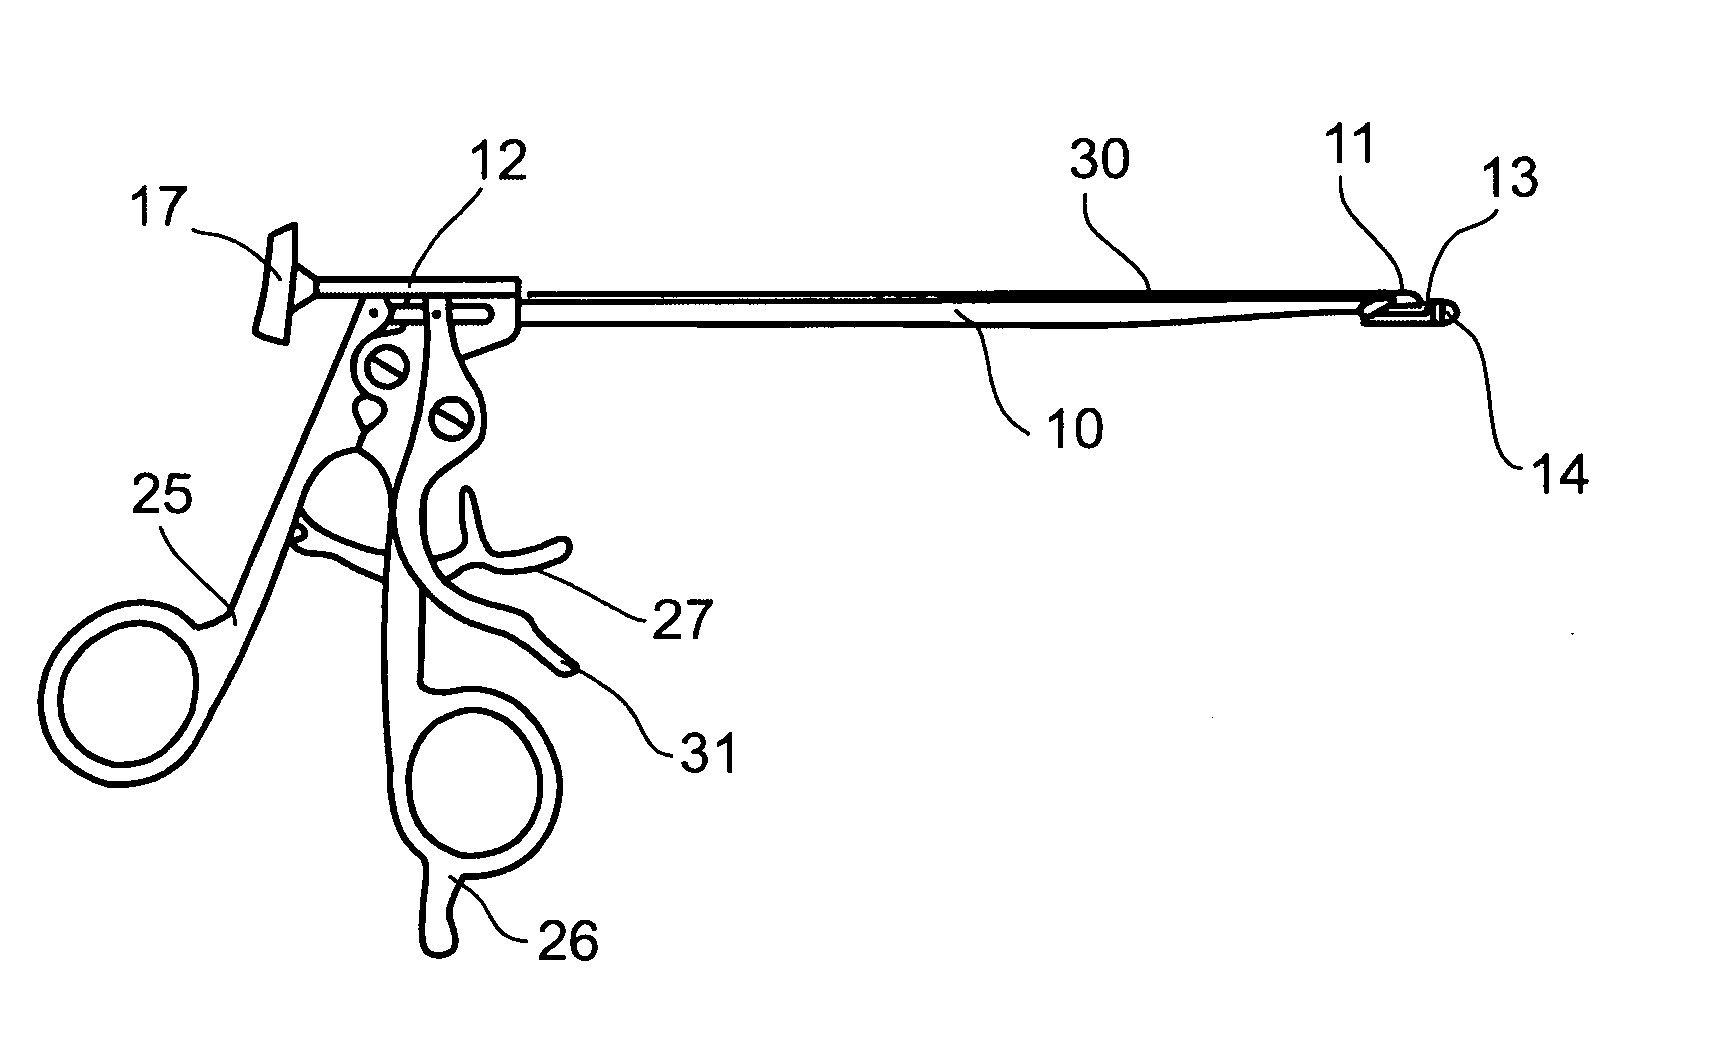 Surgical Instrument and Method for Attaching Soft Tissue to a Bone